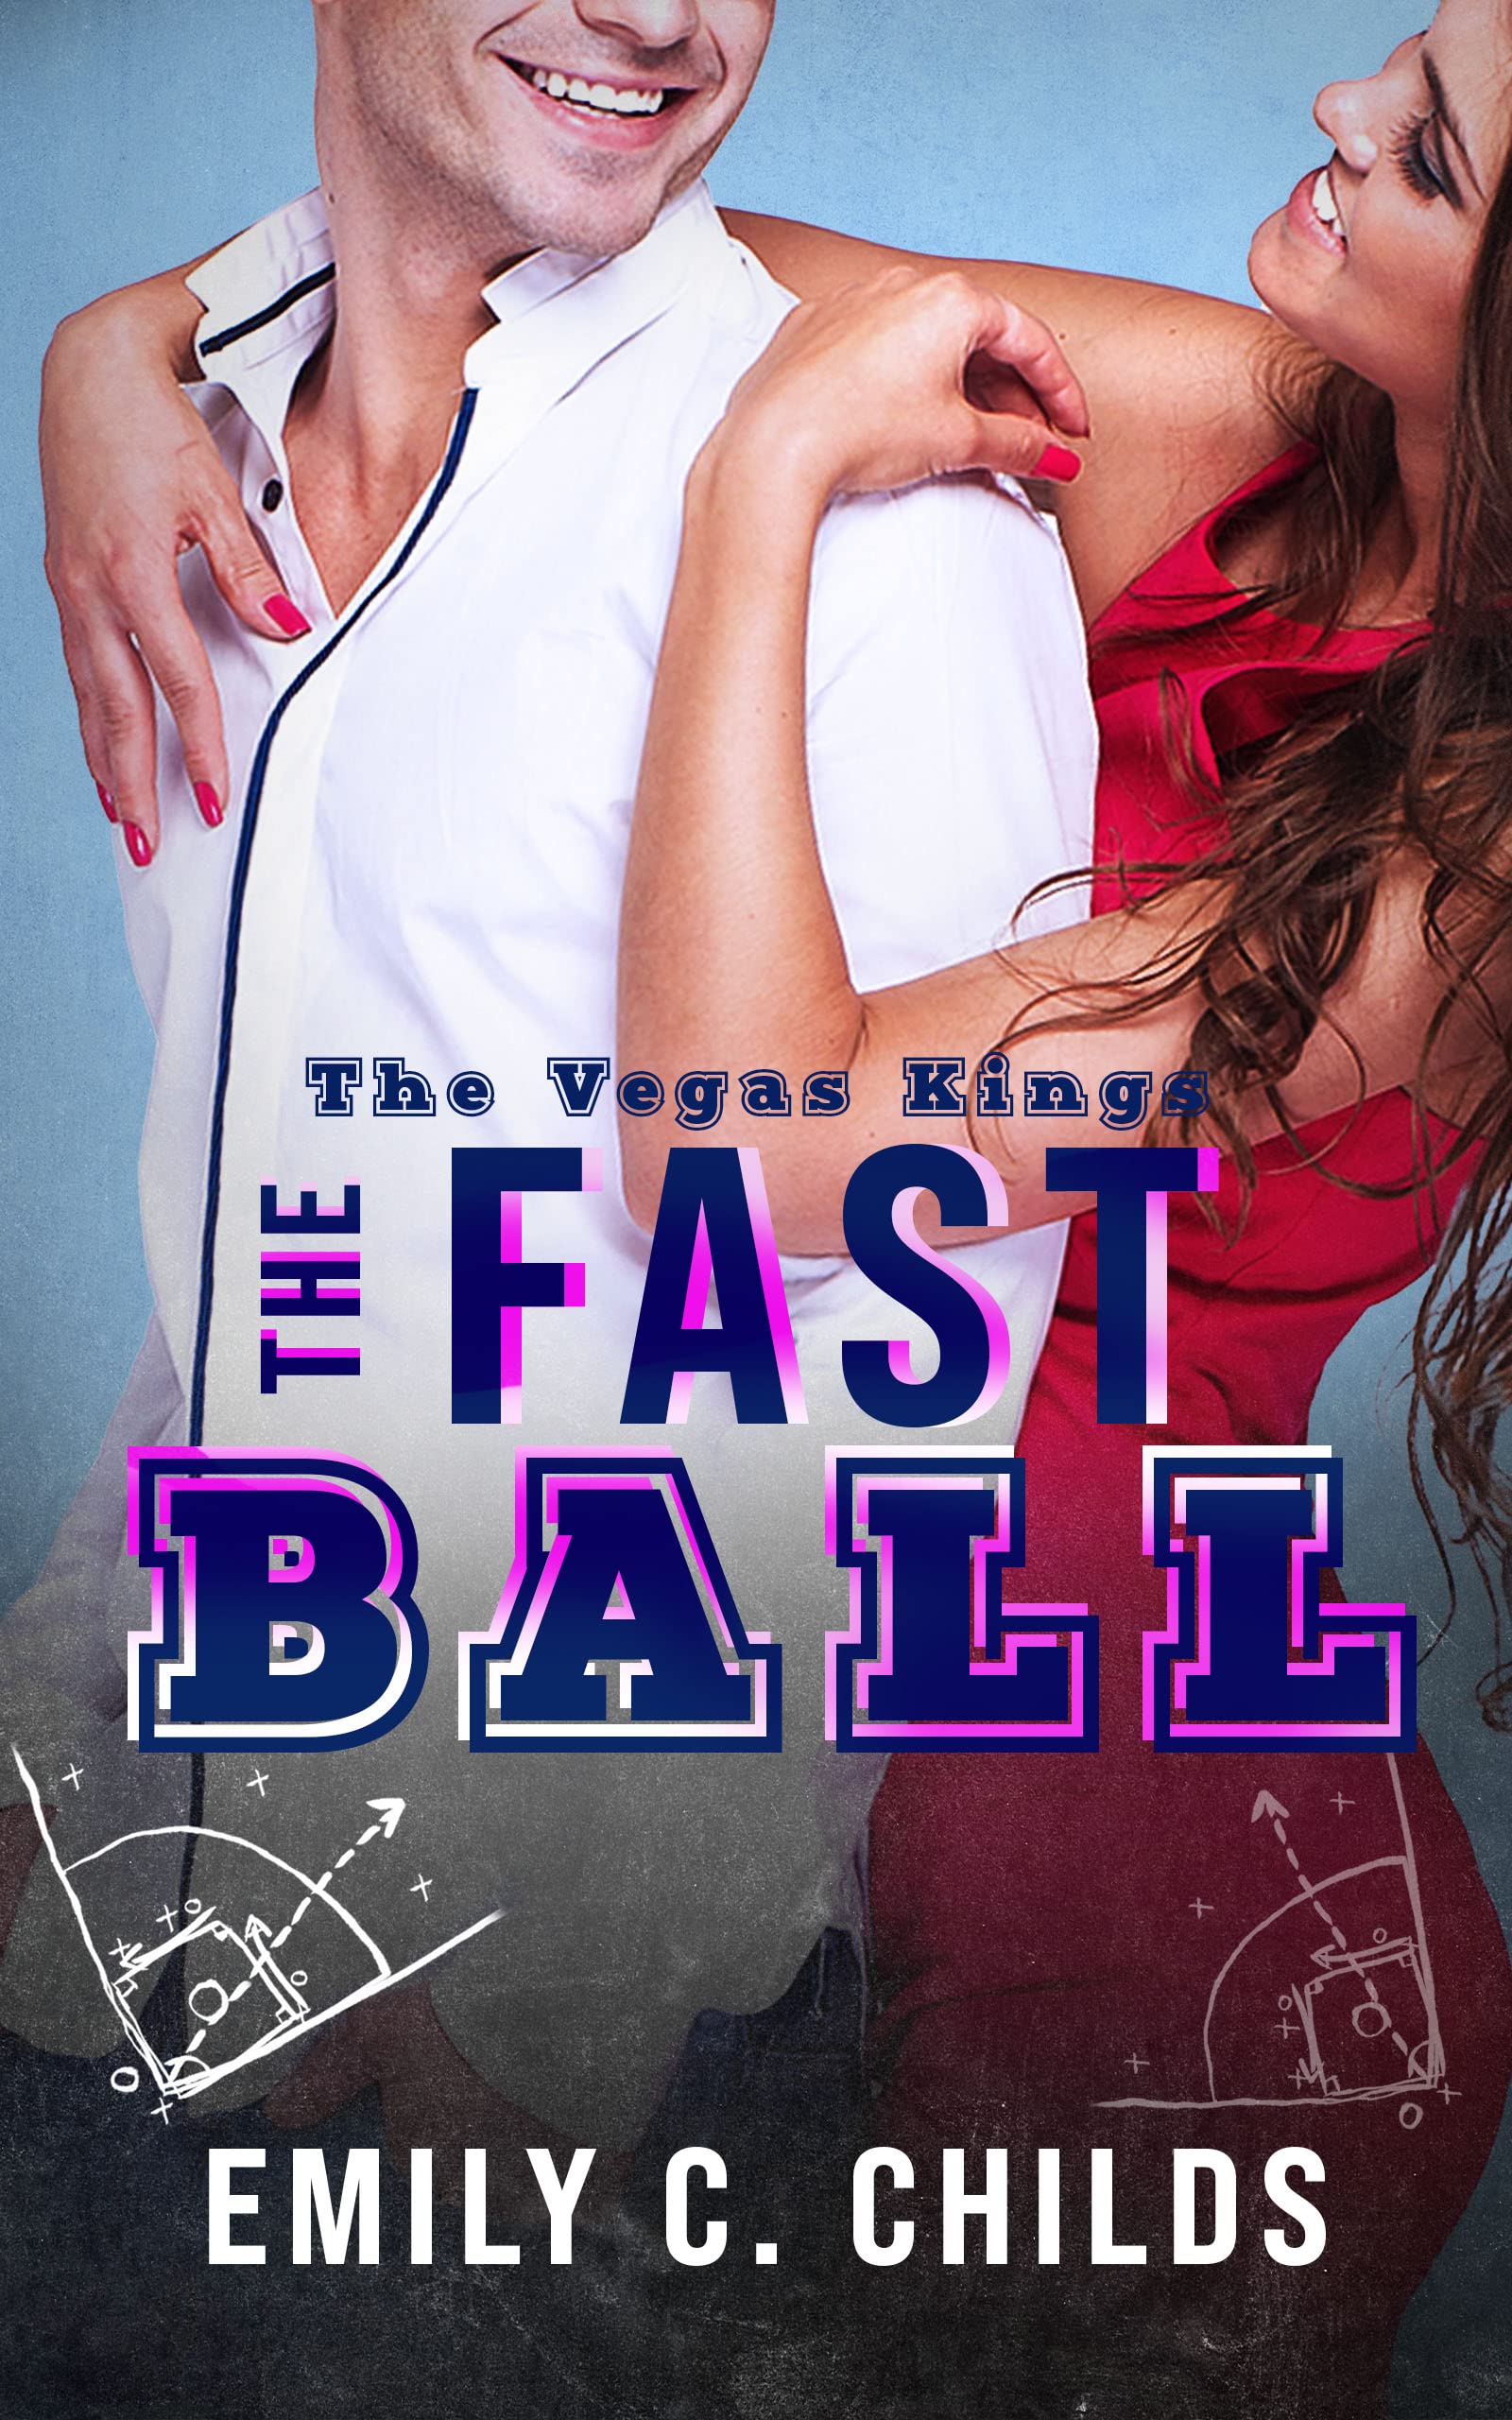 The Fastball